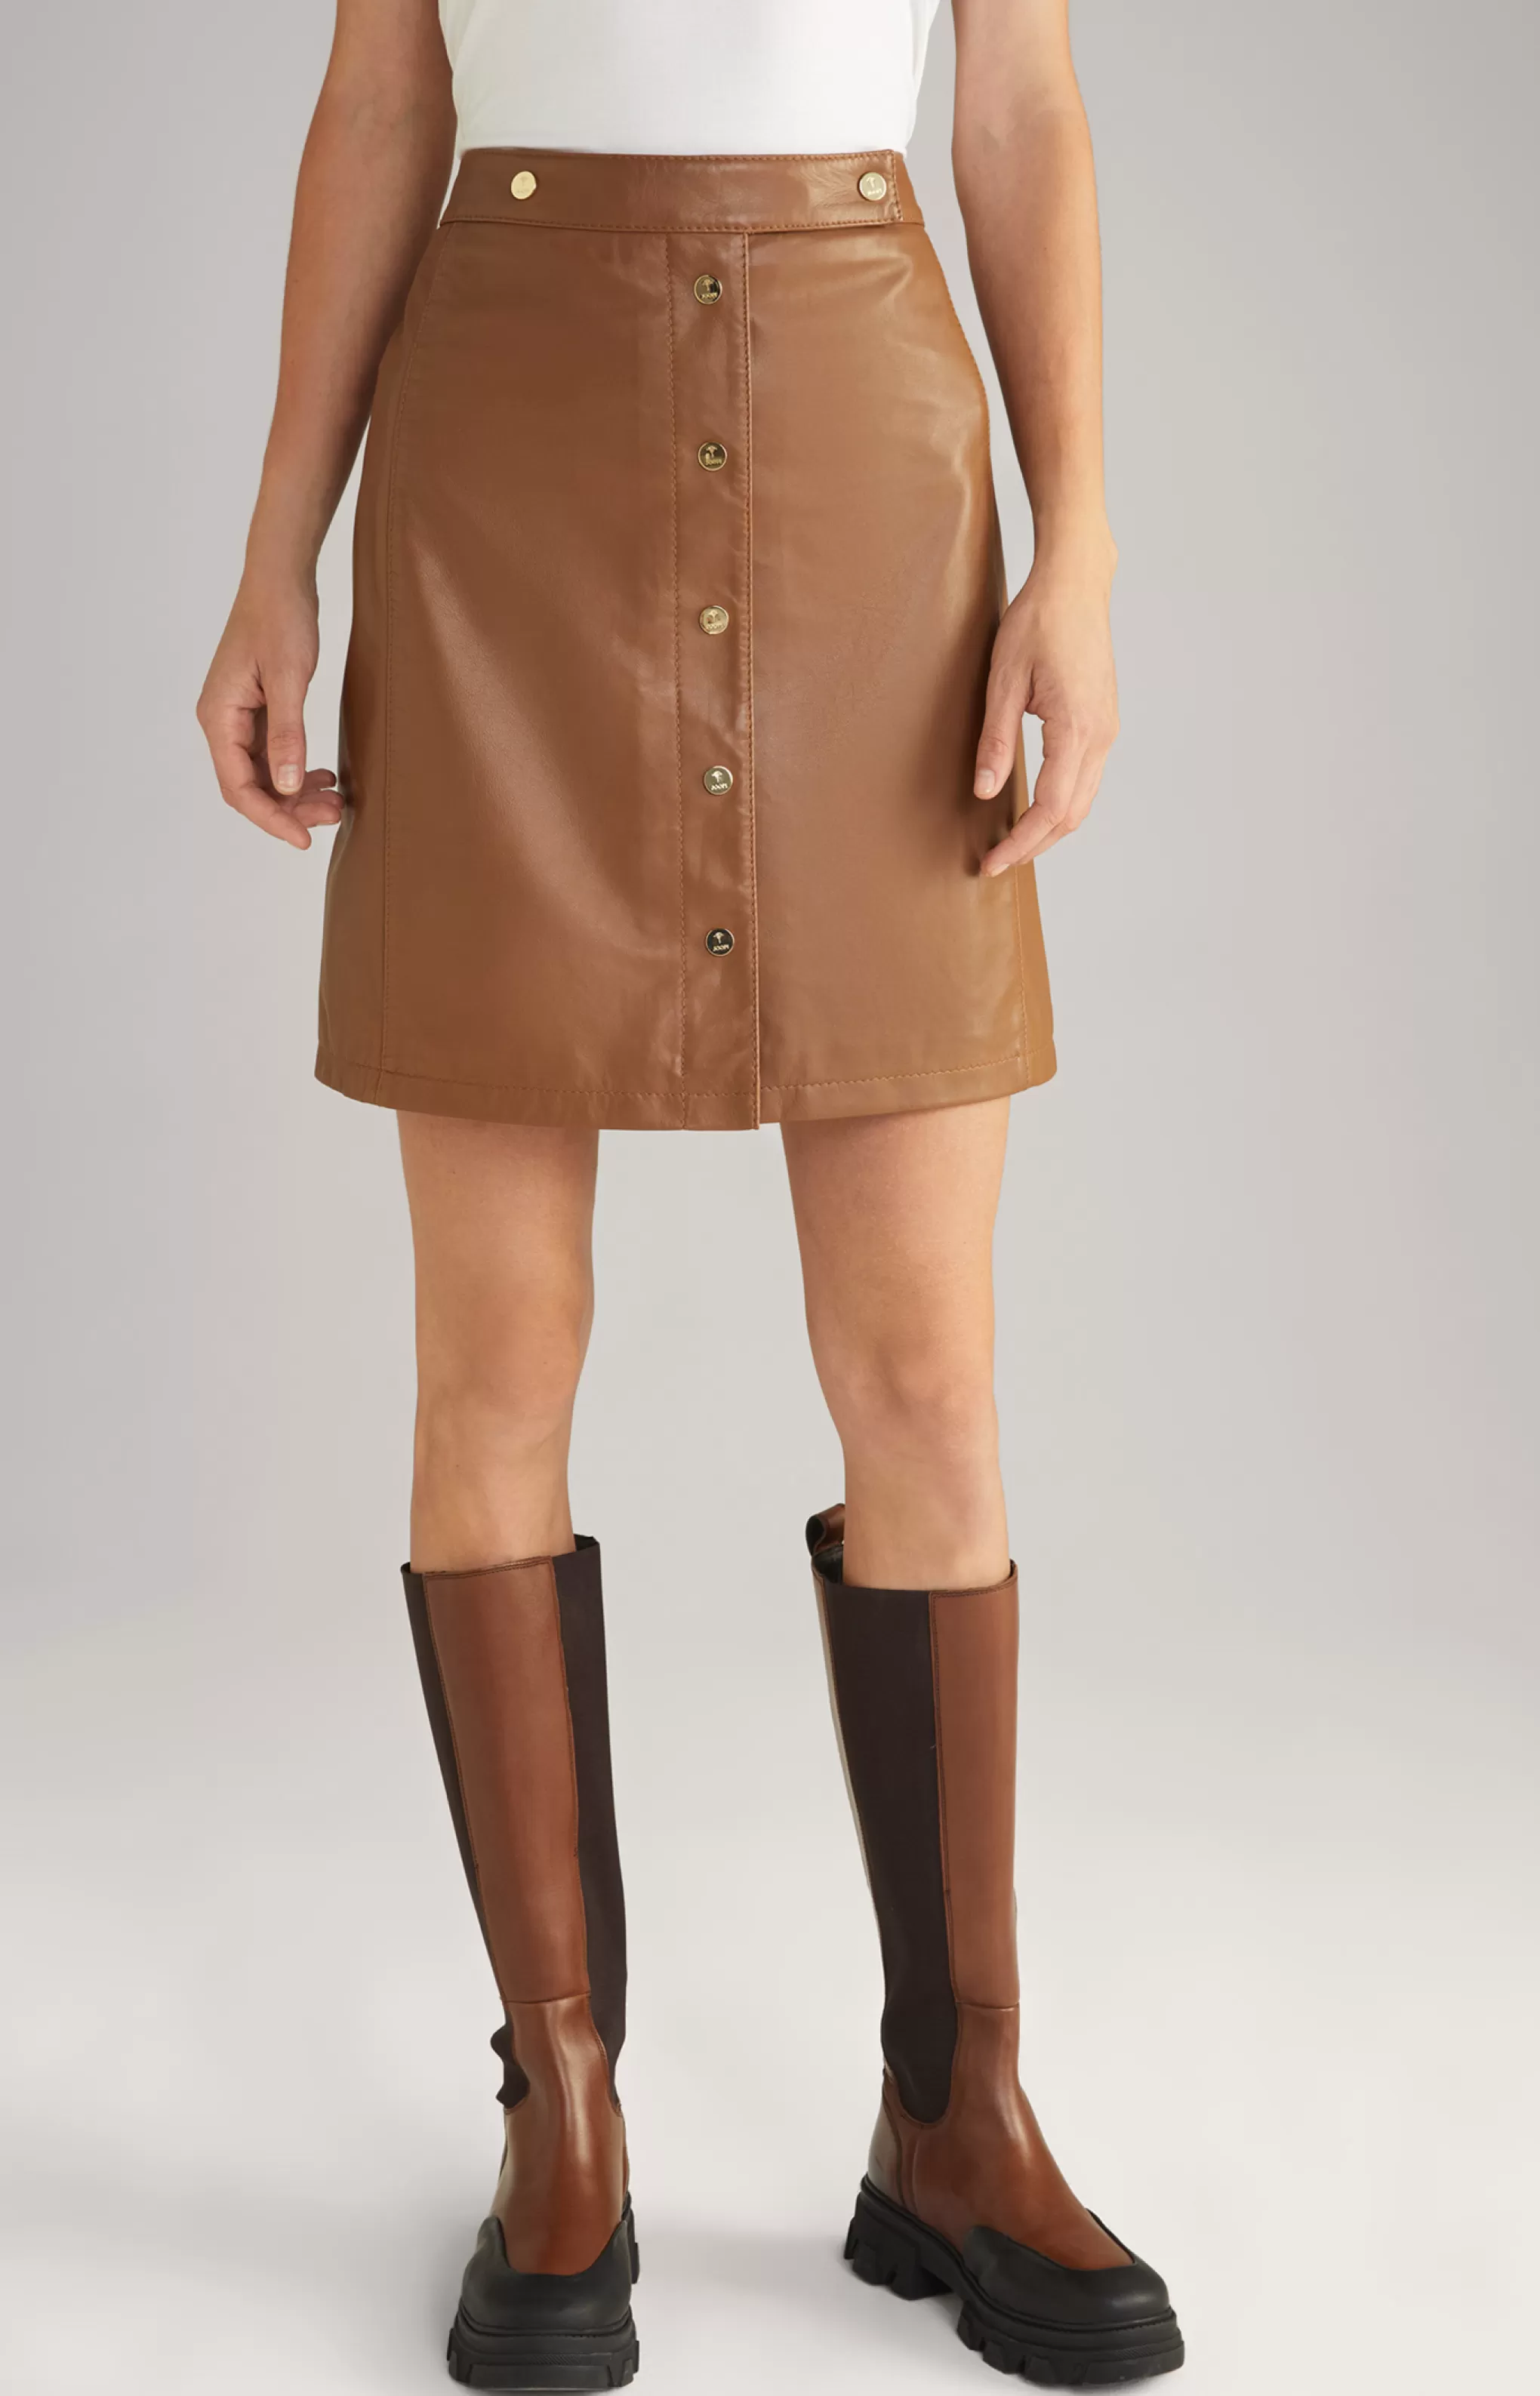 Leather | Dresses & Skirts | Clothing*JOOP Leather | Dresses & Skirts | Clothing Leather Skirt in